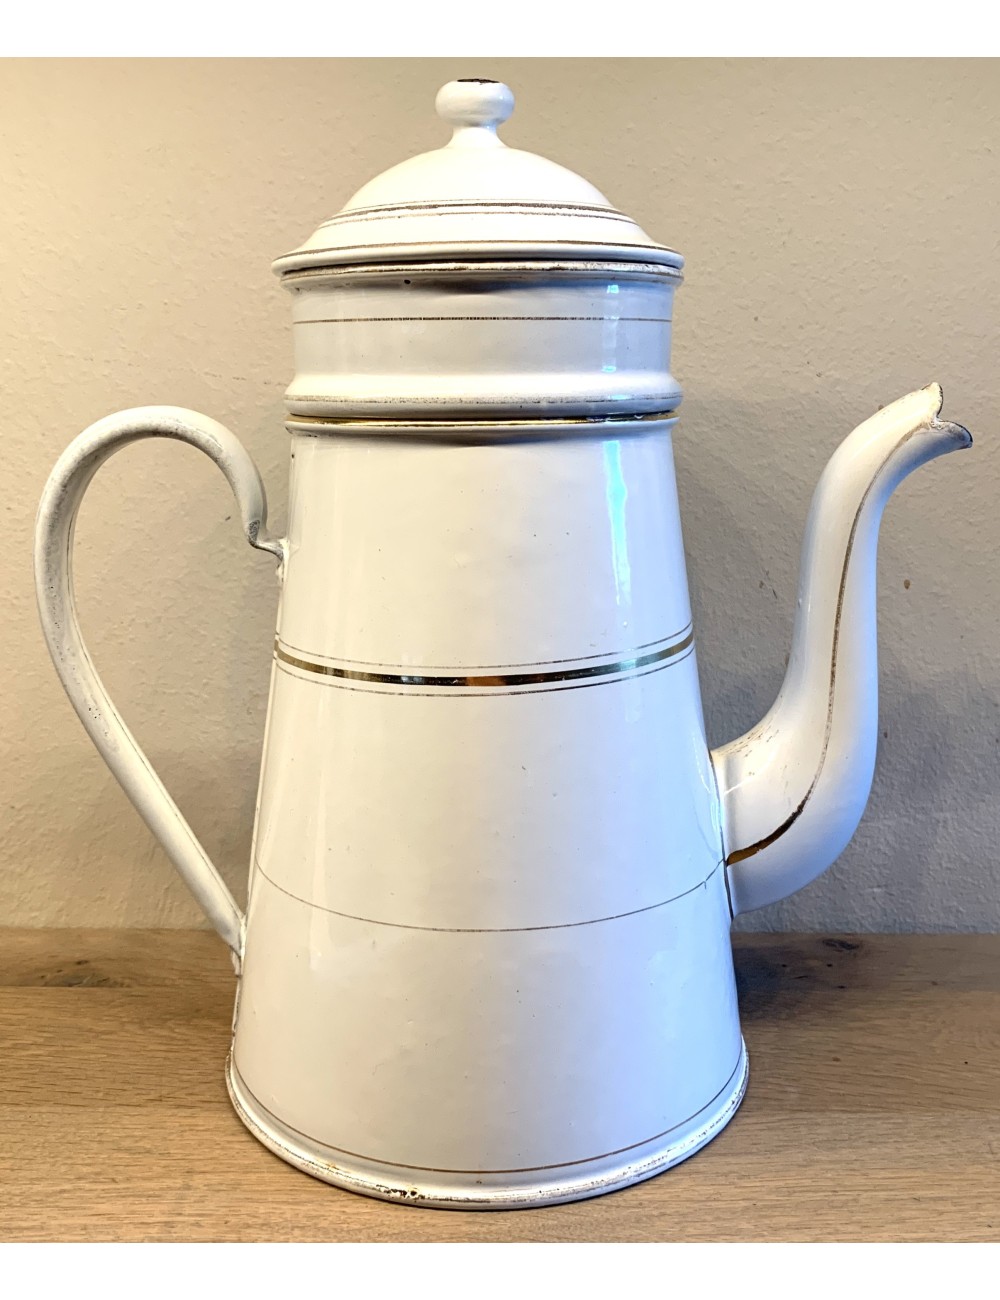 https://www.ramblingrose.nl/5470-large_default/coffee-pot-plus-filter-white-enamel-with-gold-stripes-decoration-unmarked-probably-french.jpg